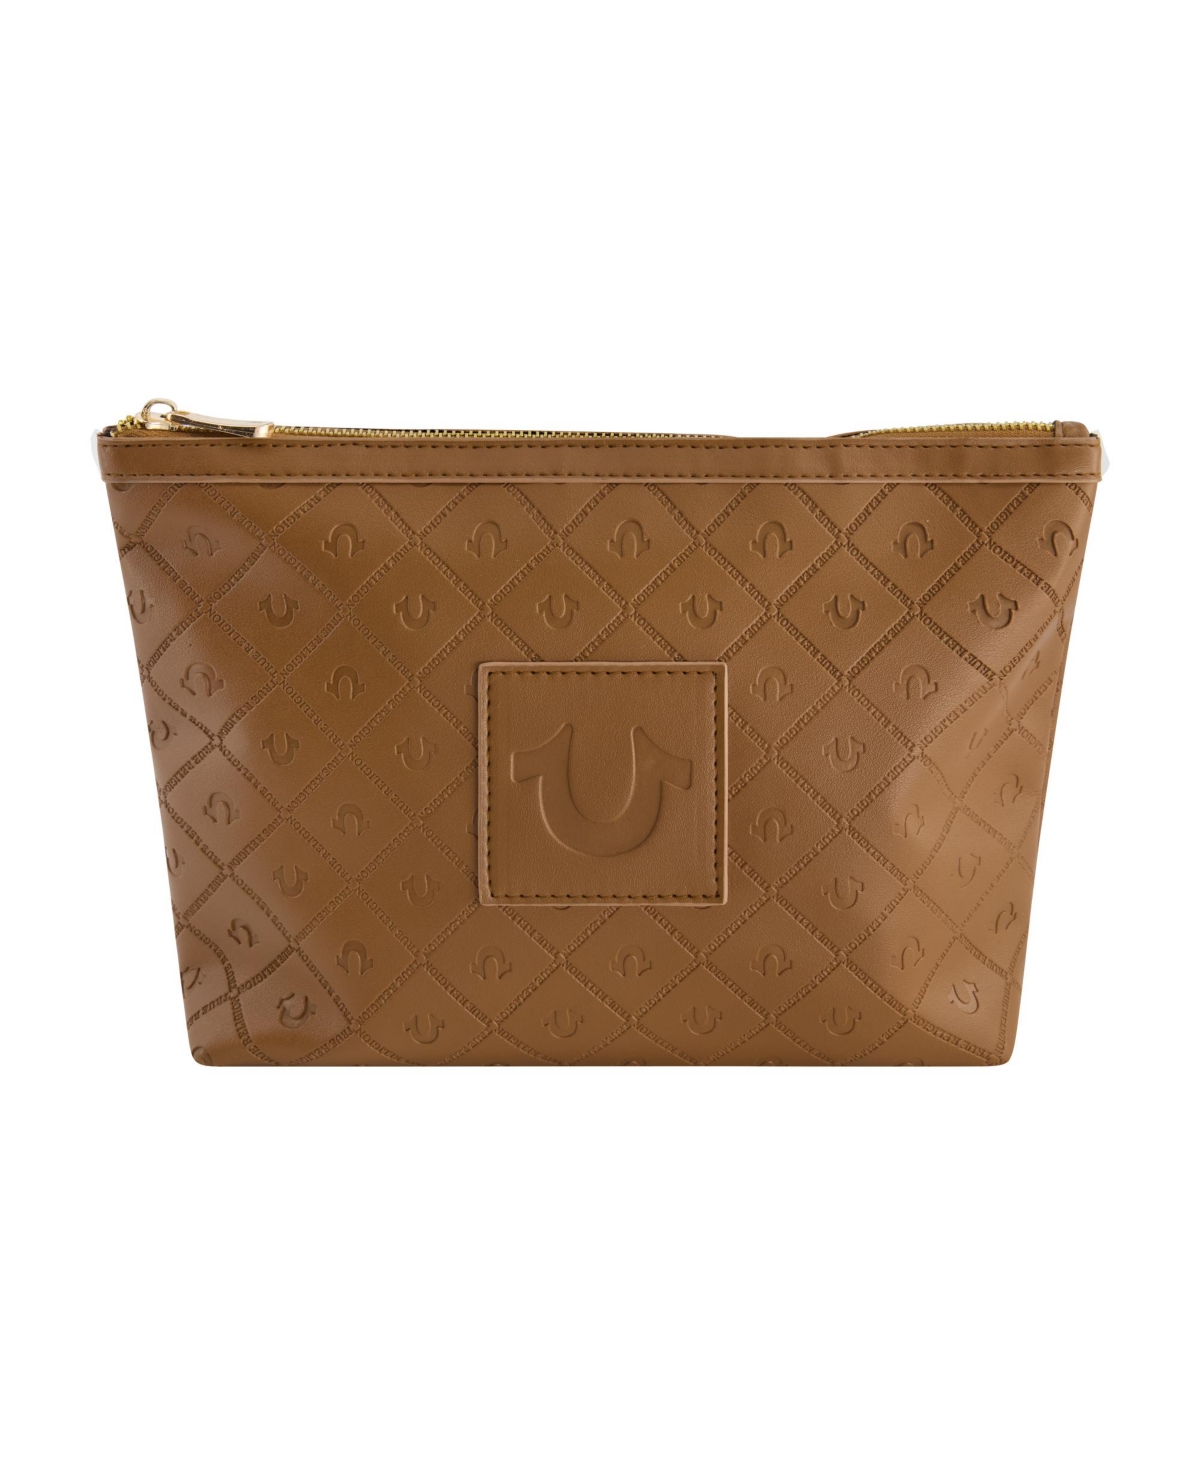 cosmetic case - Brown